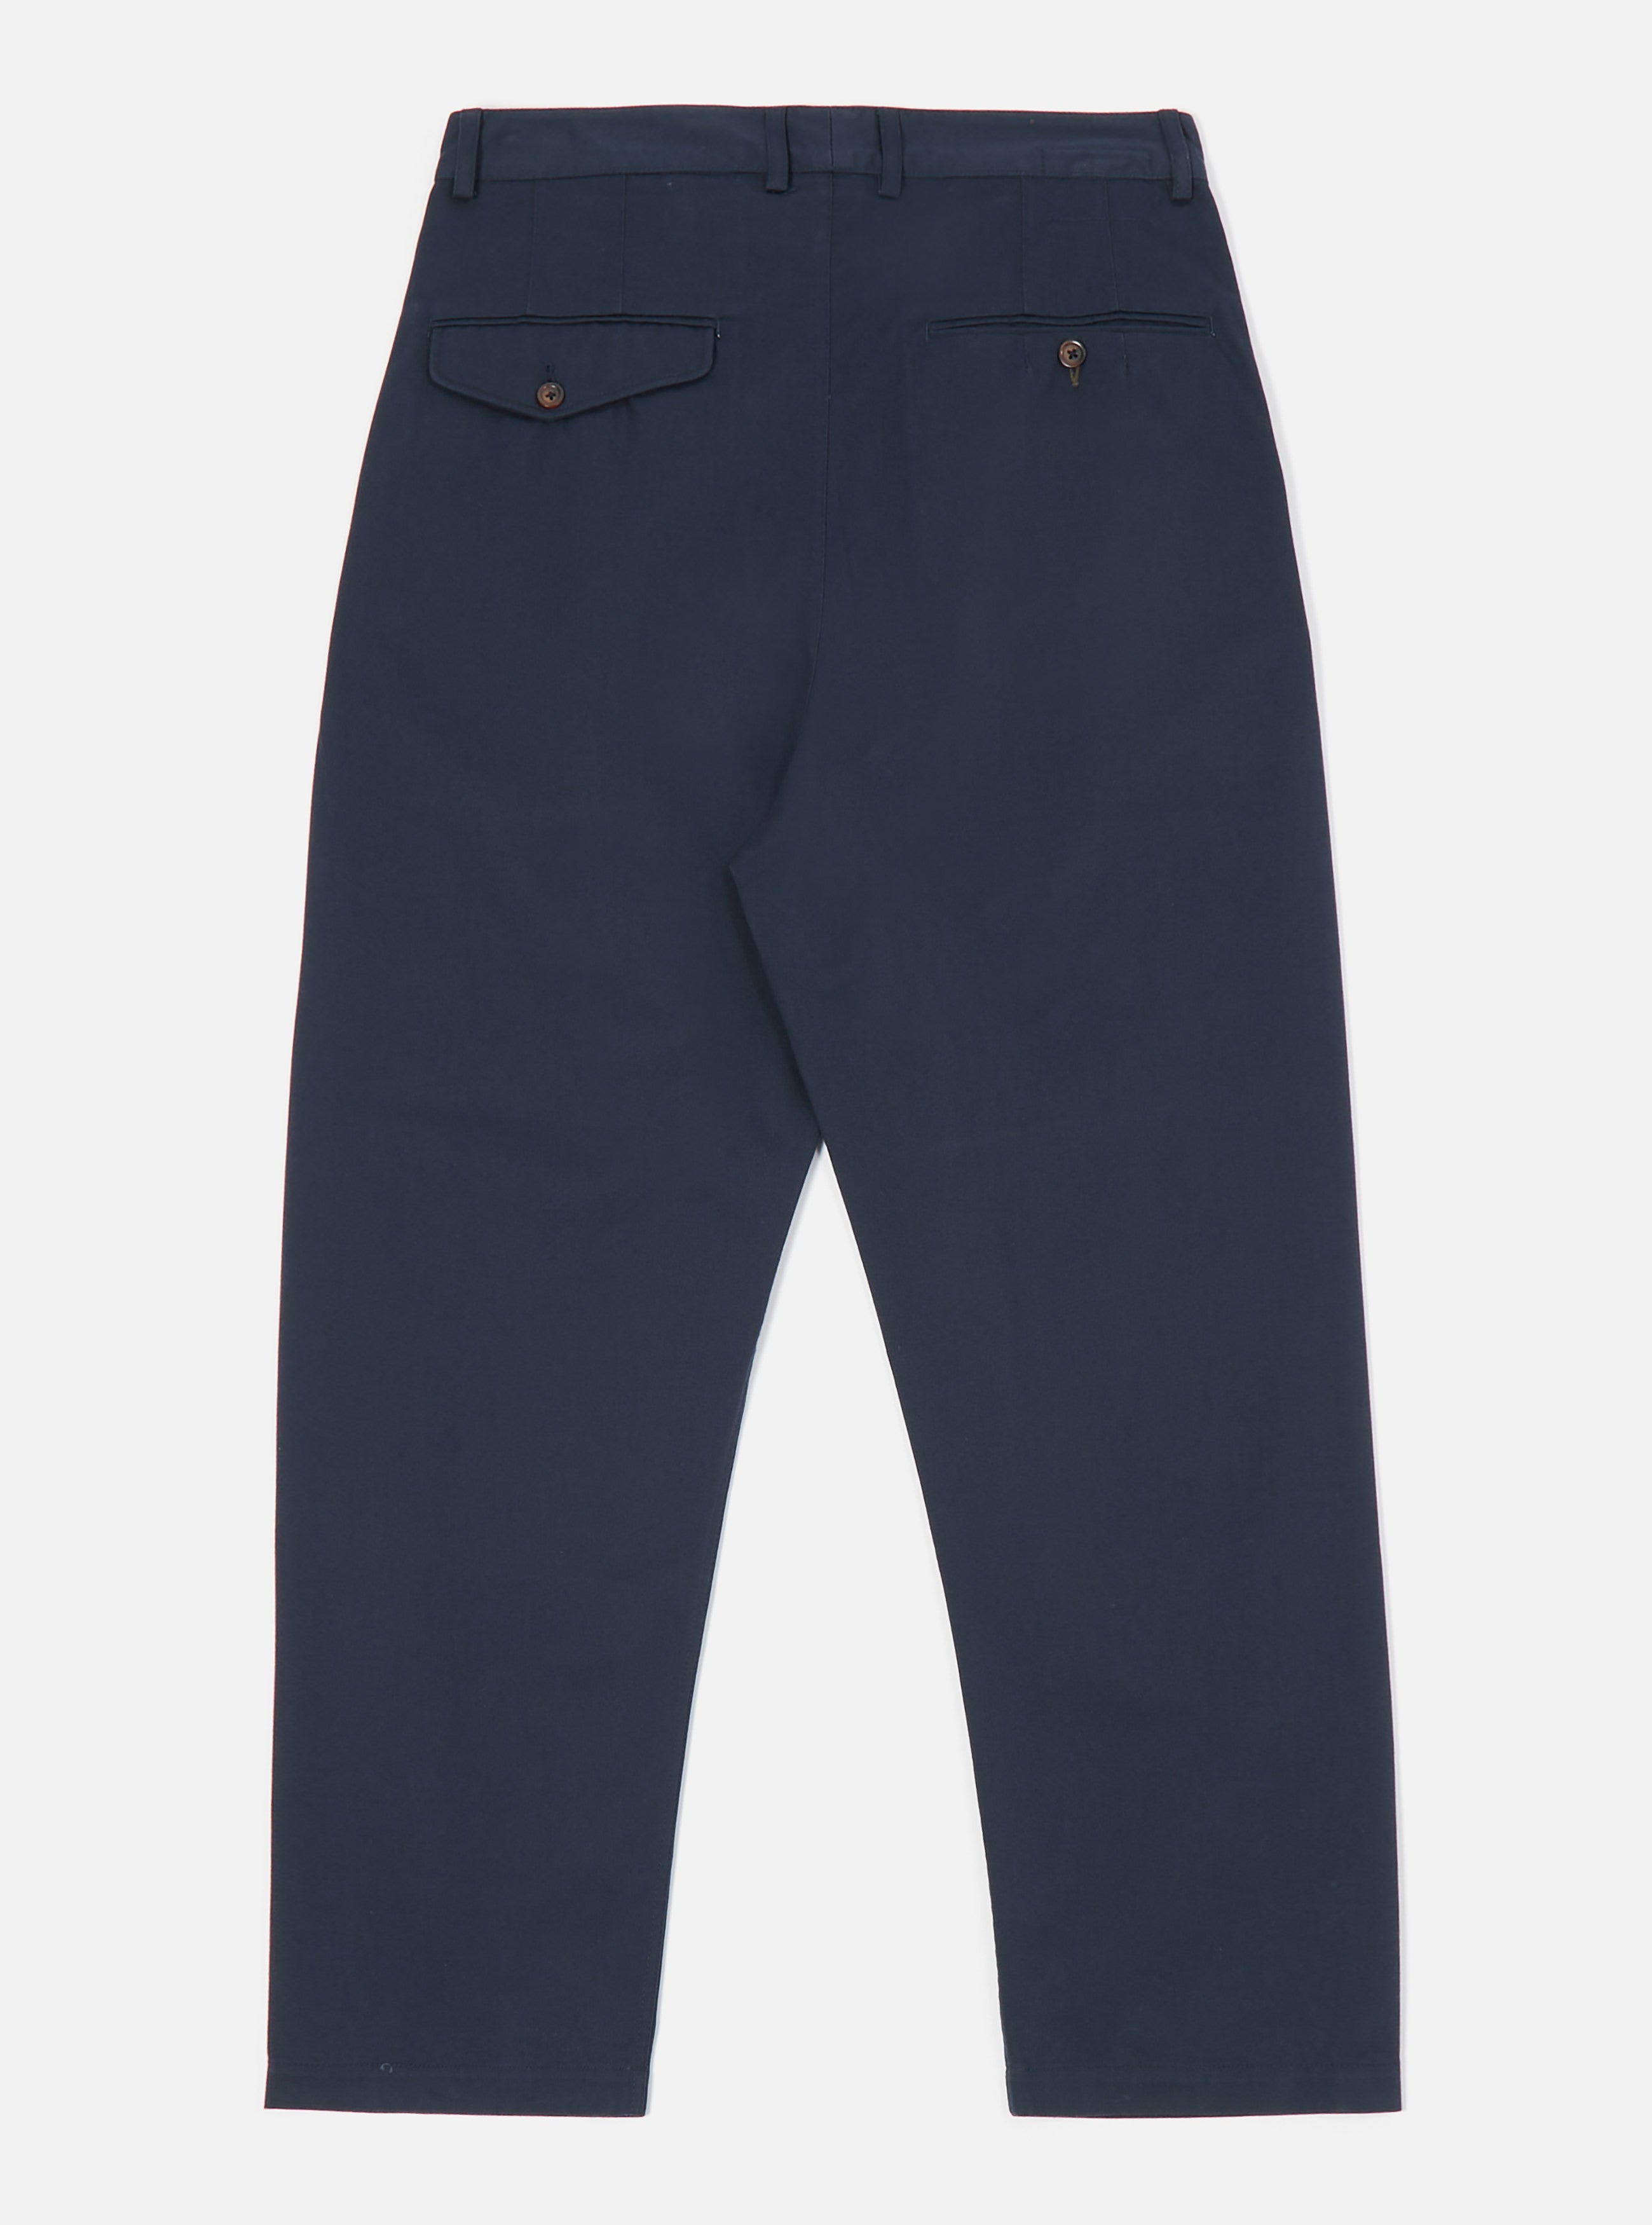 Twin Pleat Stretch Trousers | M&S US